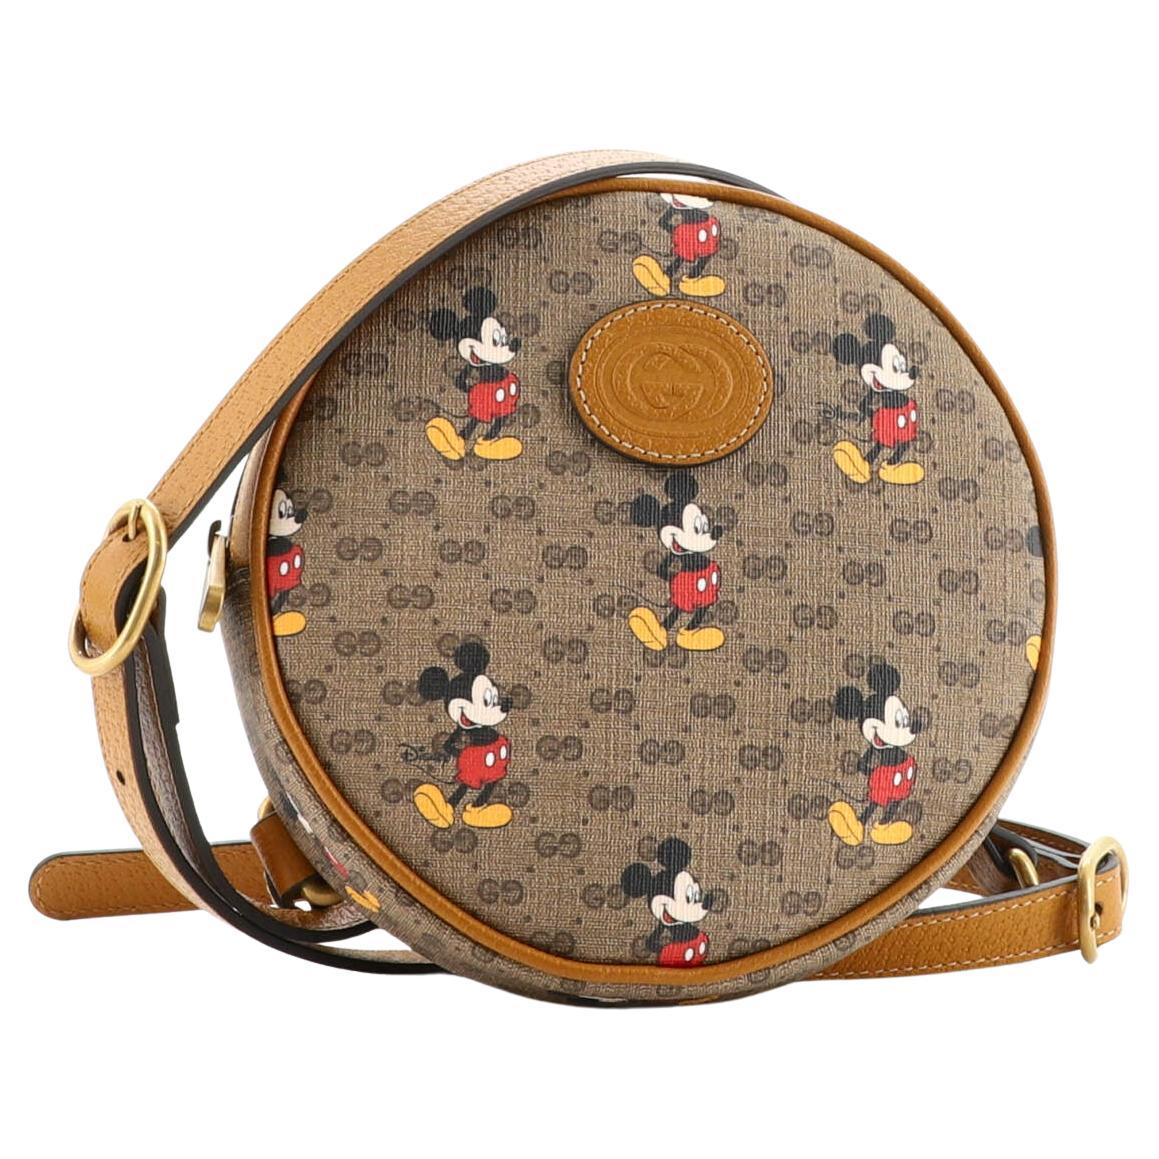 Gucci Mickey - 10 For Sale on 1stDibs  gucci mickey mouse bag, gucci  disney bag mickey mouse, gucci mickey round bag